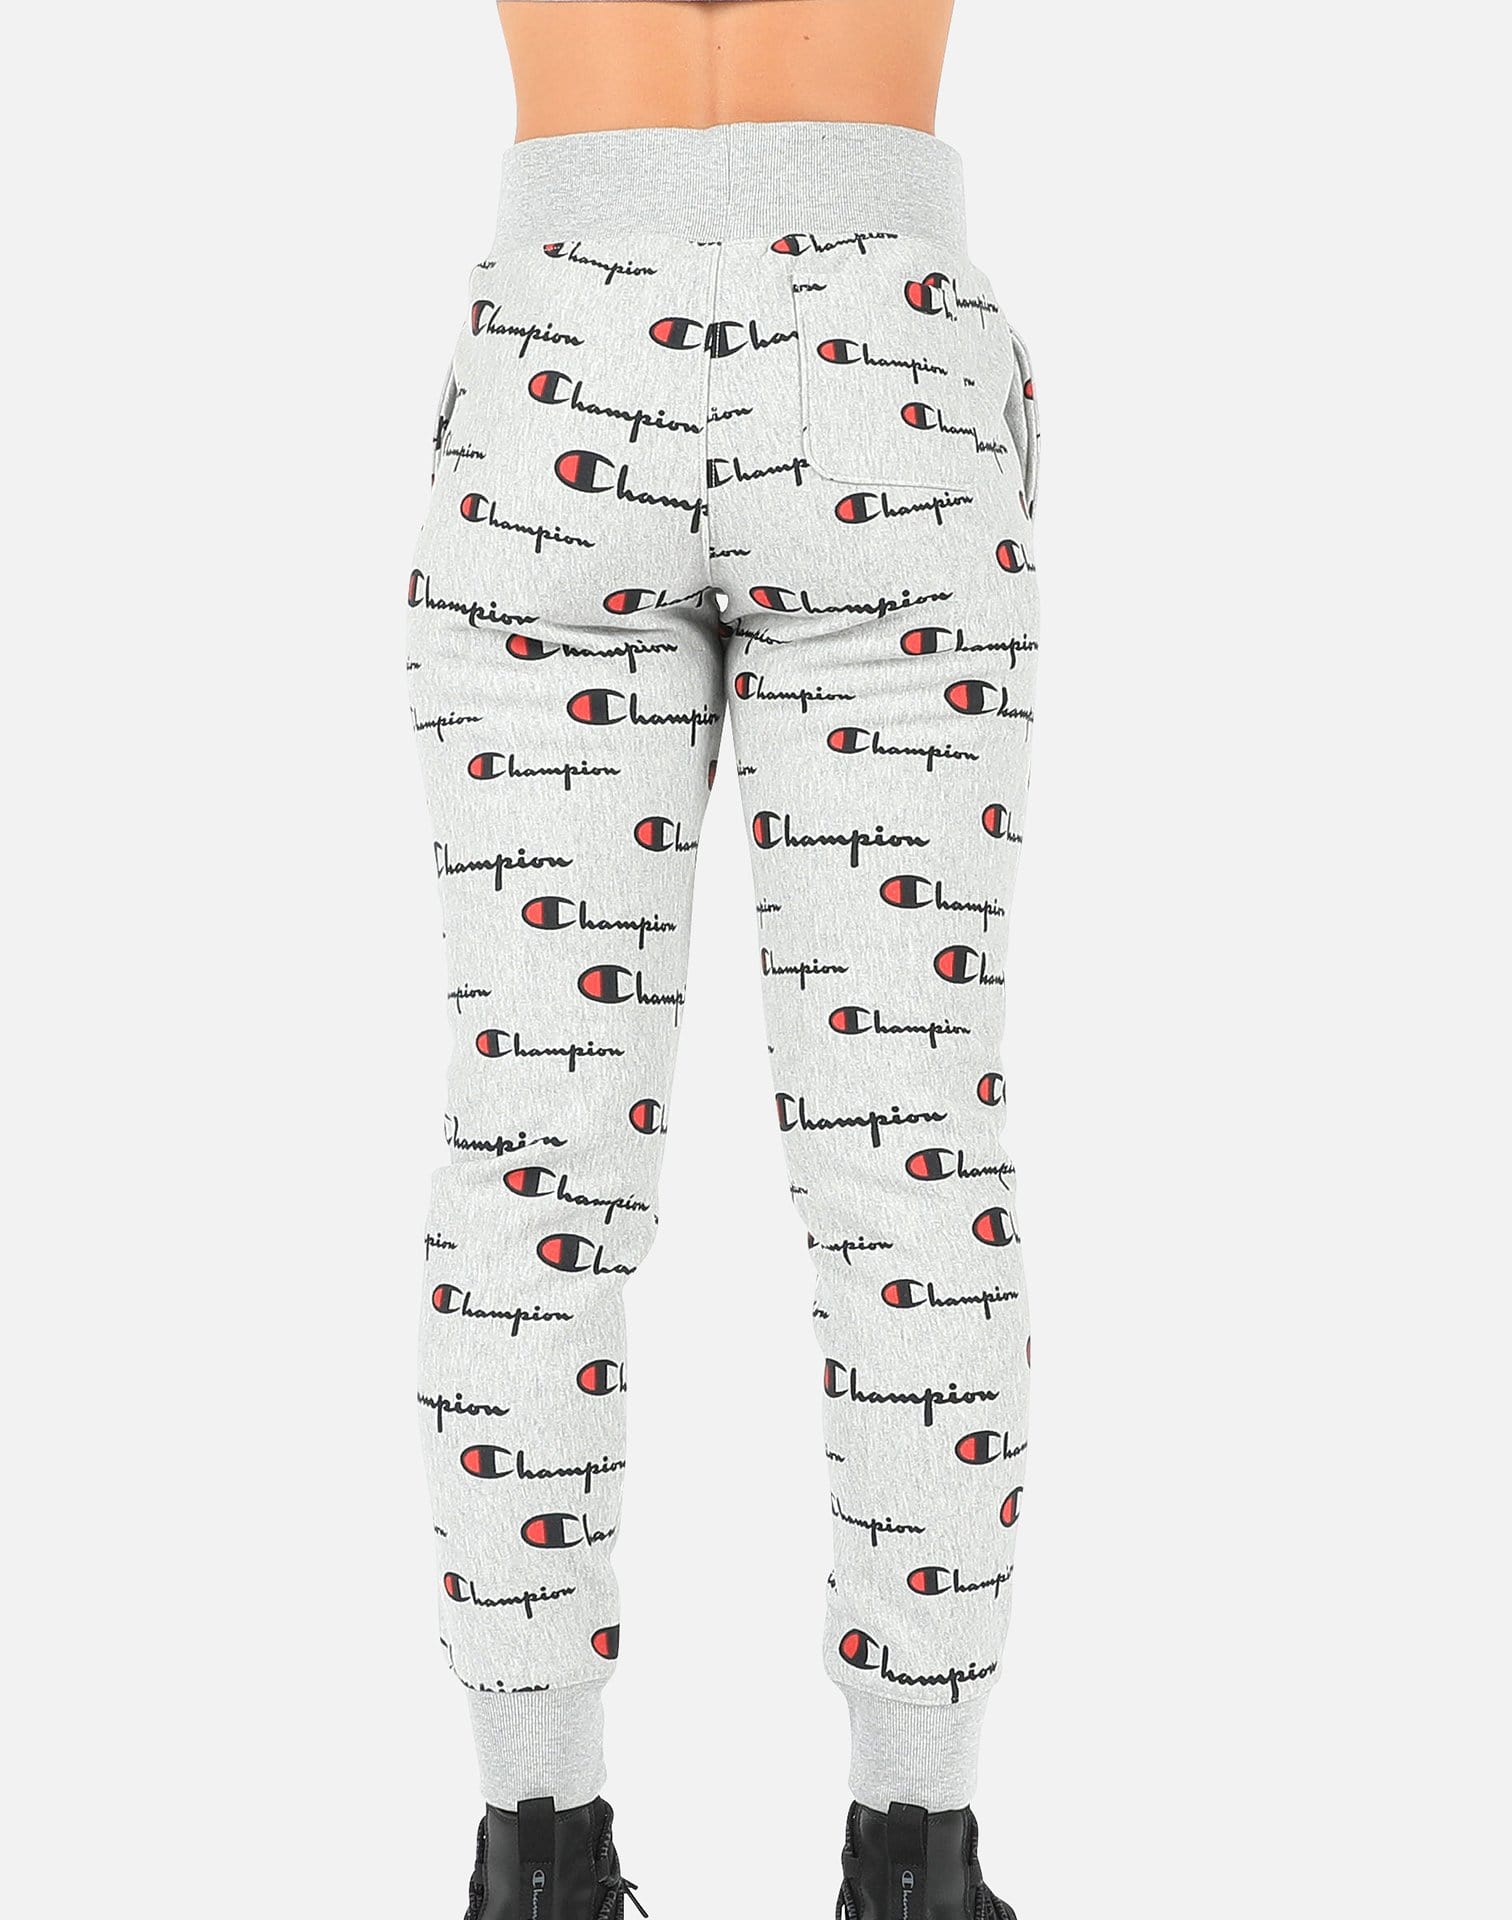 Champion Women's All-Over Print Jogger Pants